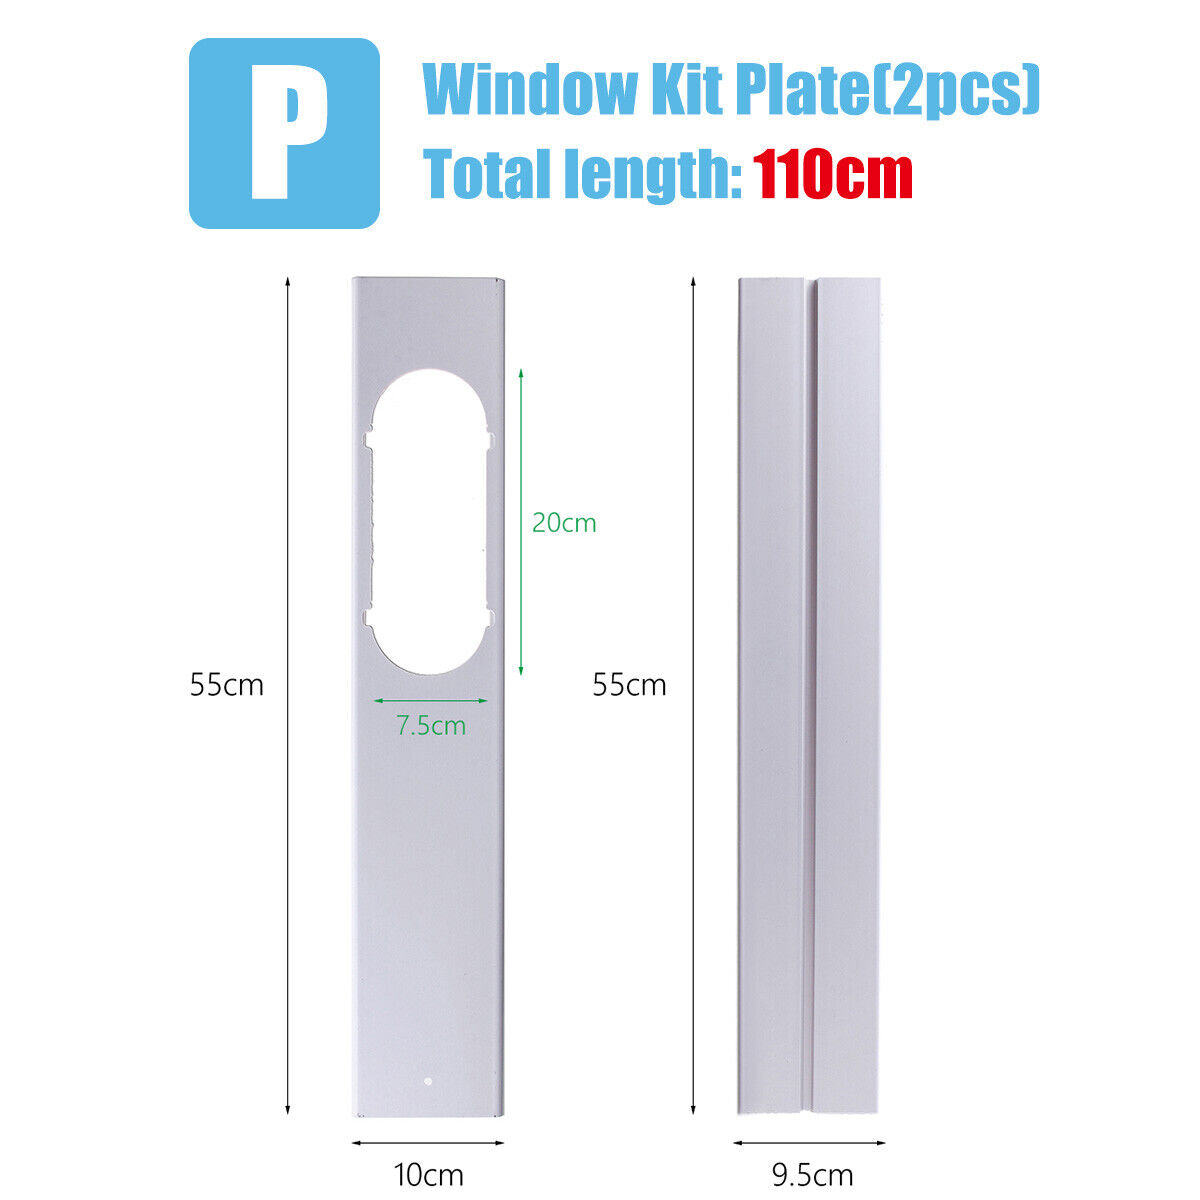 2/3Pack Window Slide Kit Plate Portable Adjustable Window For Air Conditioner US